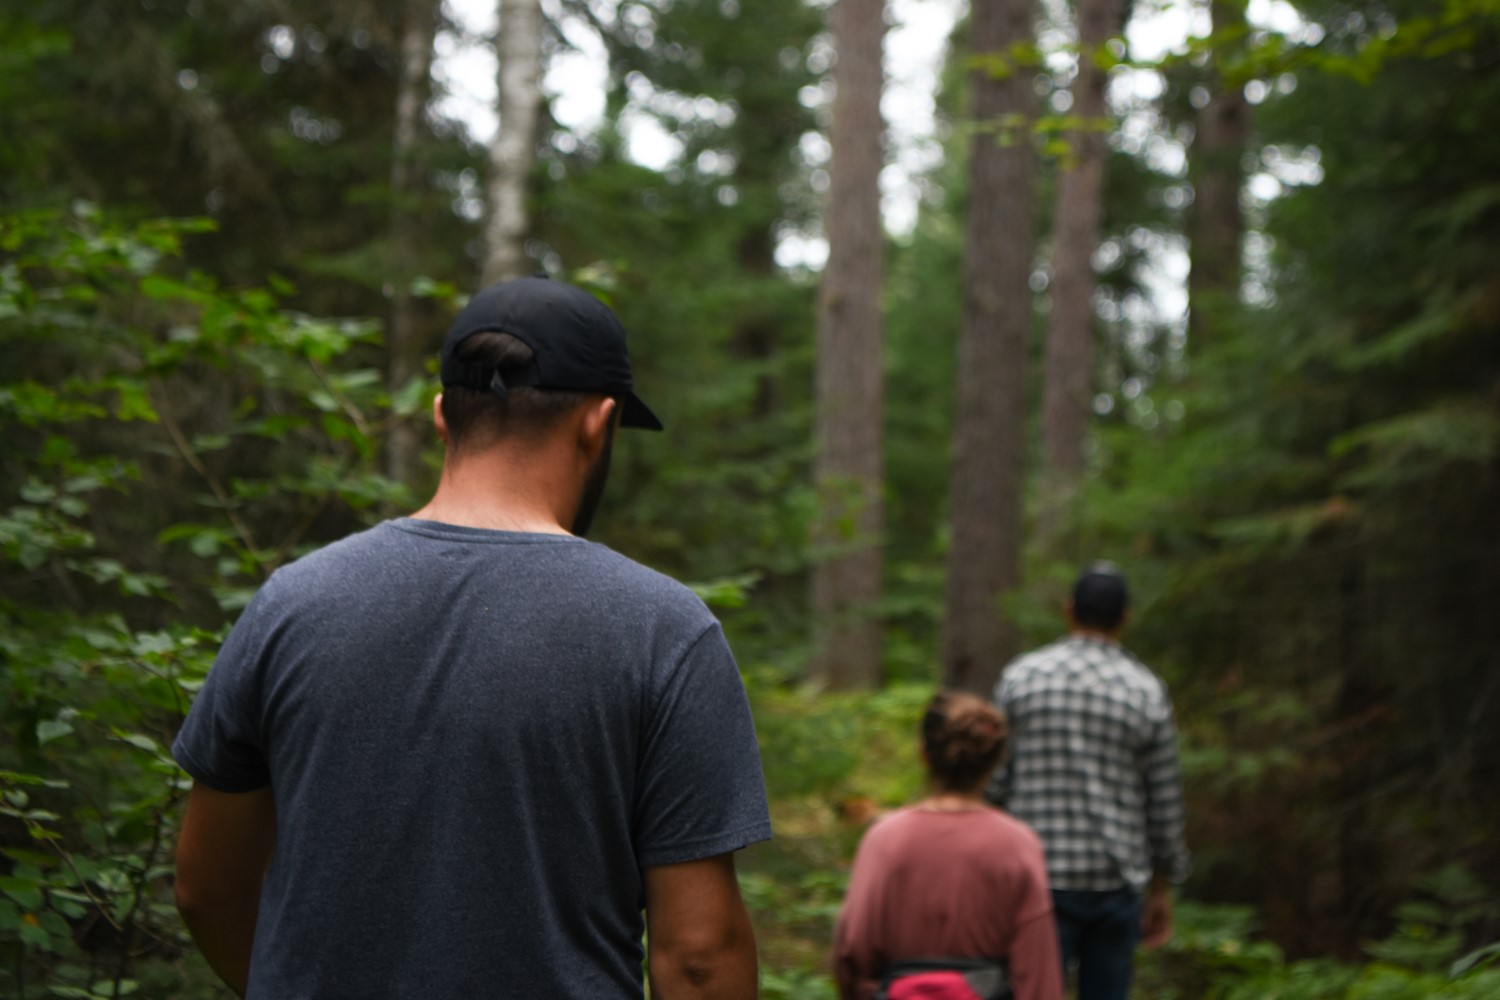 three people heading into the forest for a hike with their backs to the camera